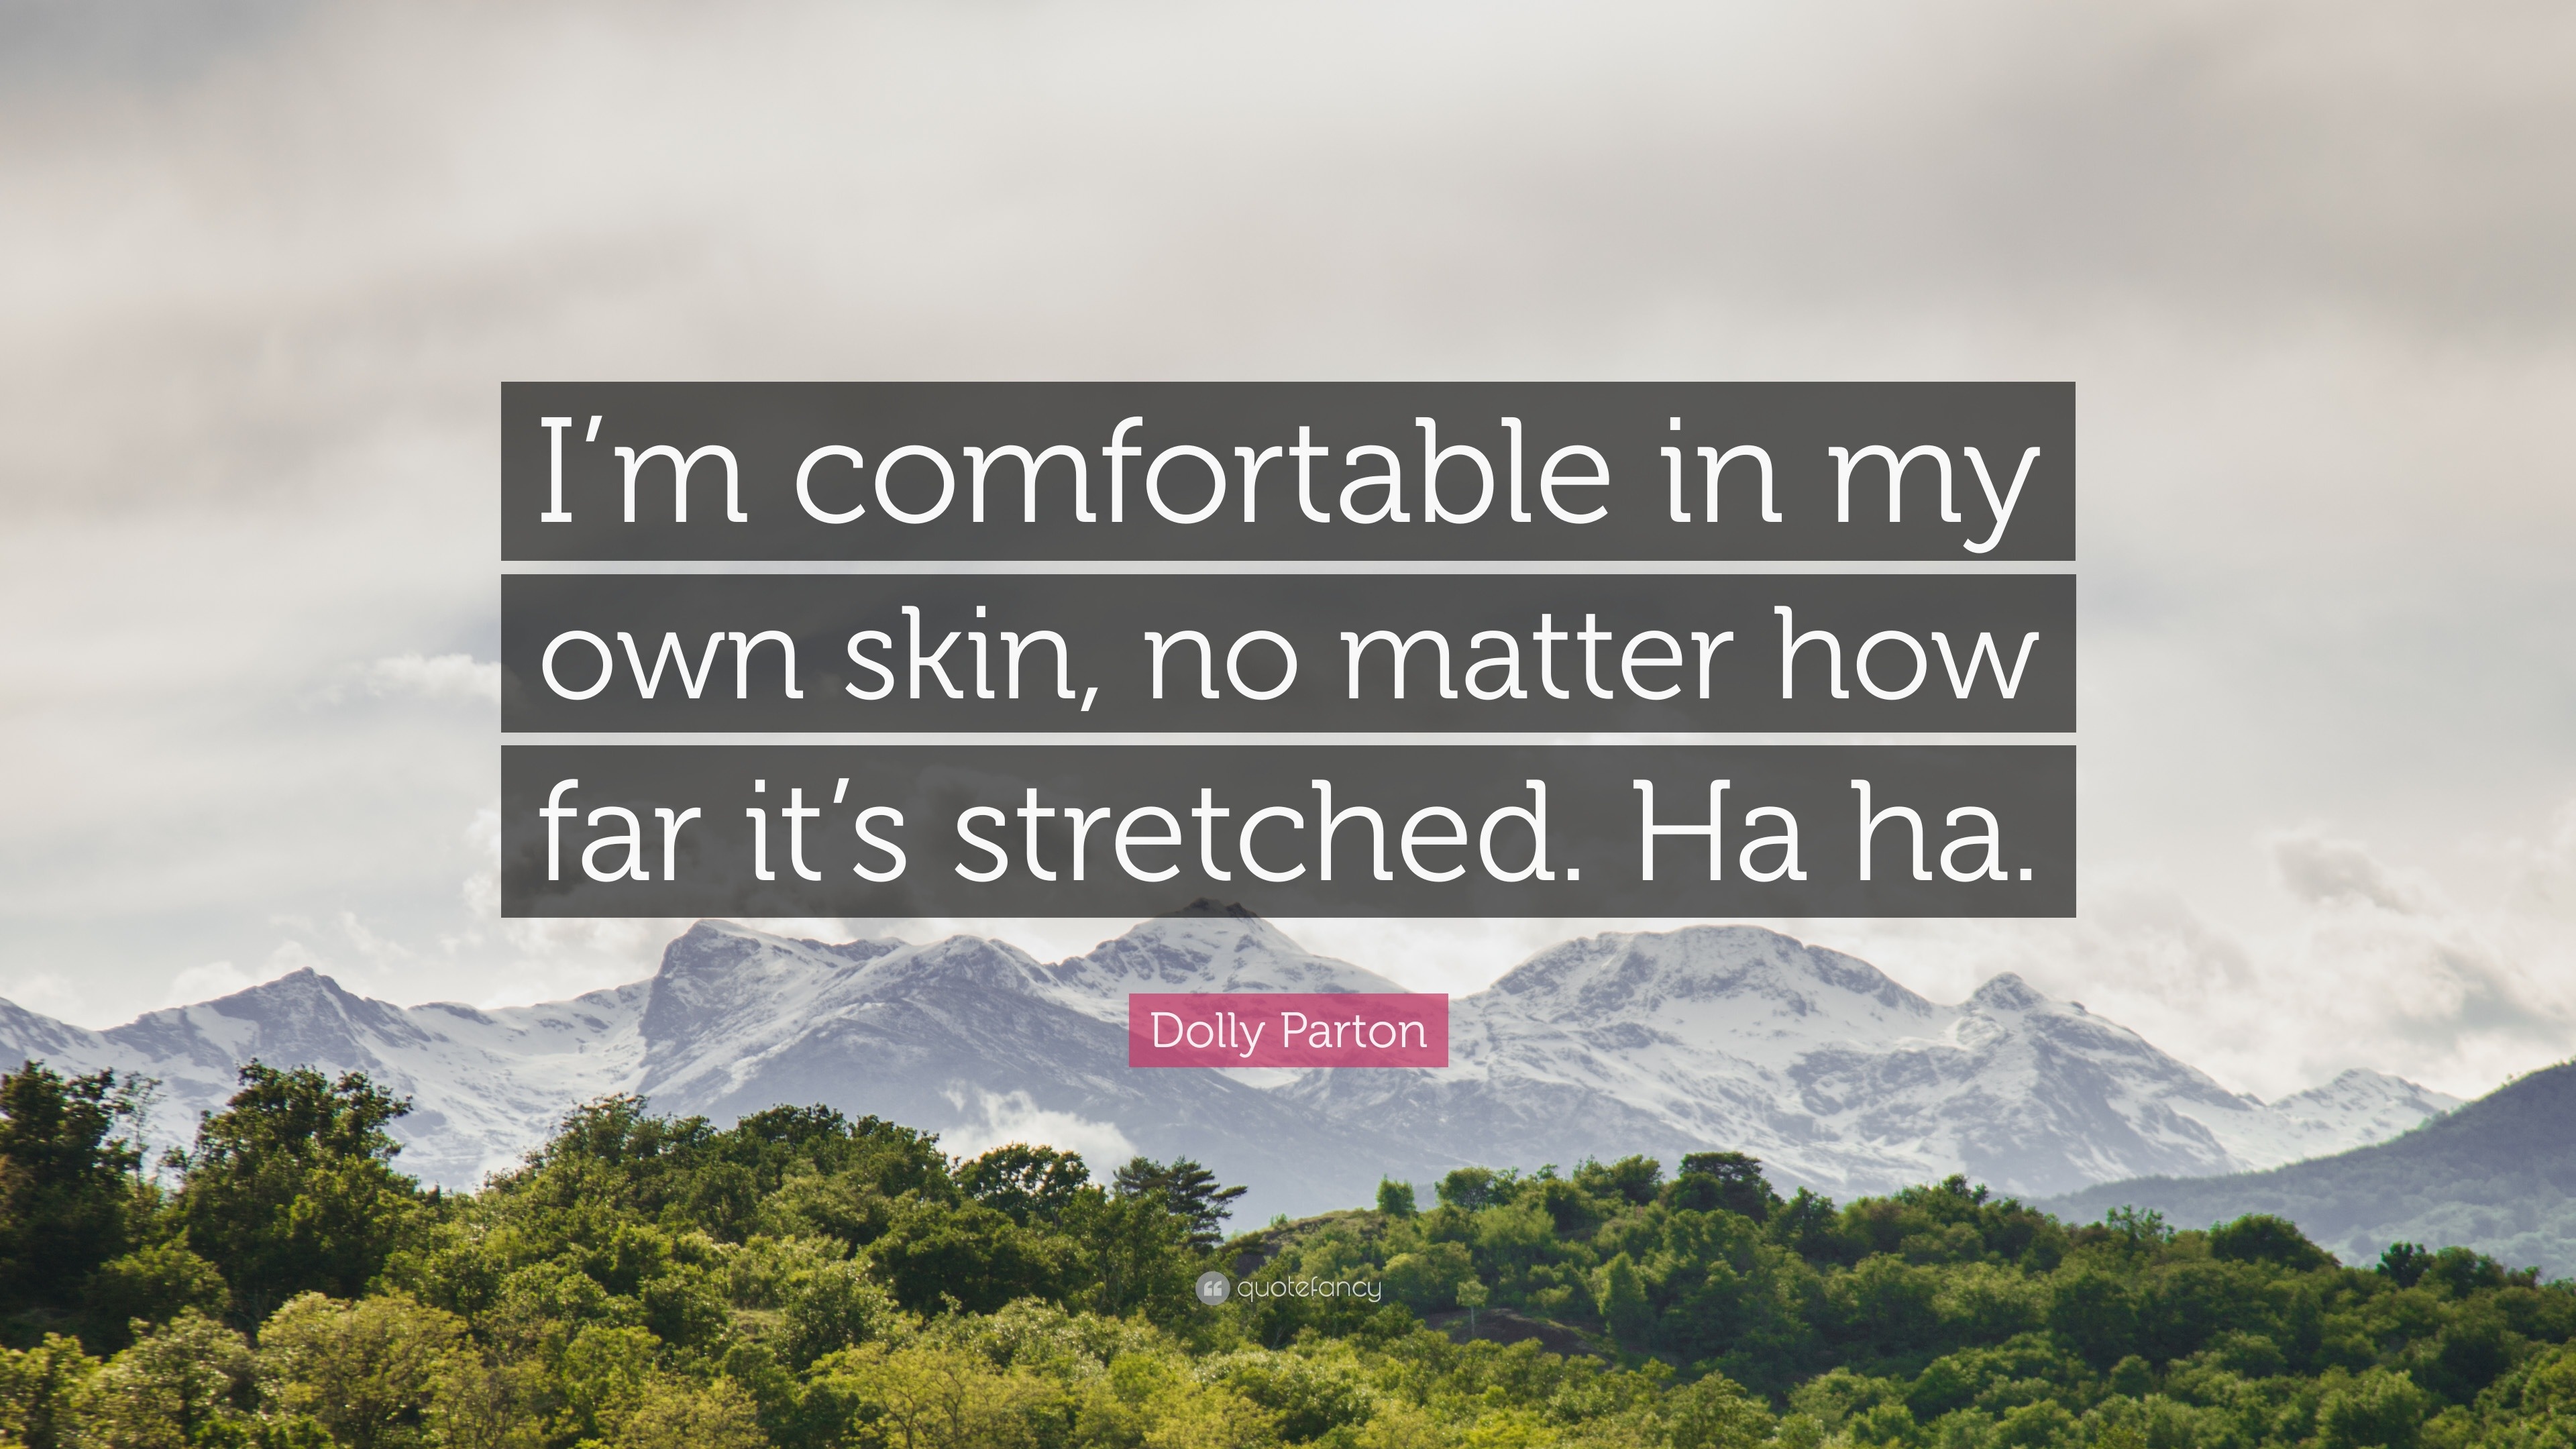 We weren't comfortable in our own skin - let alone baring it